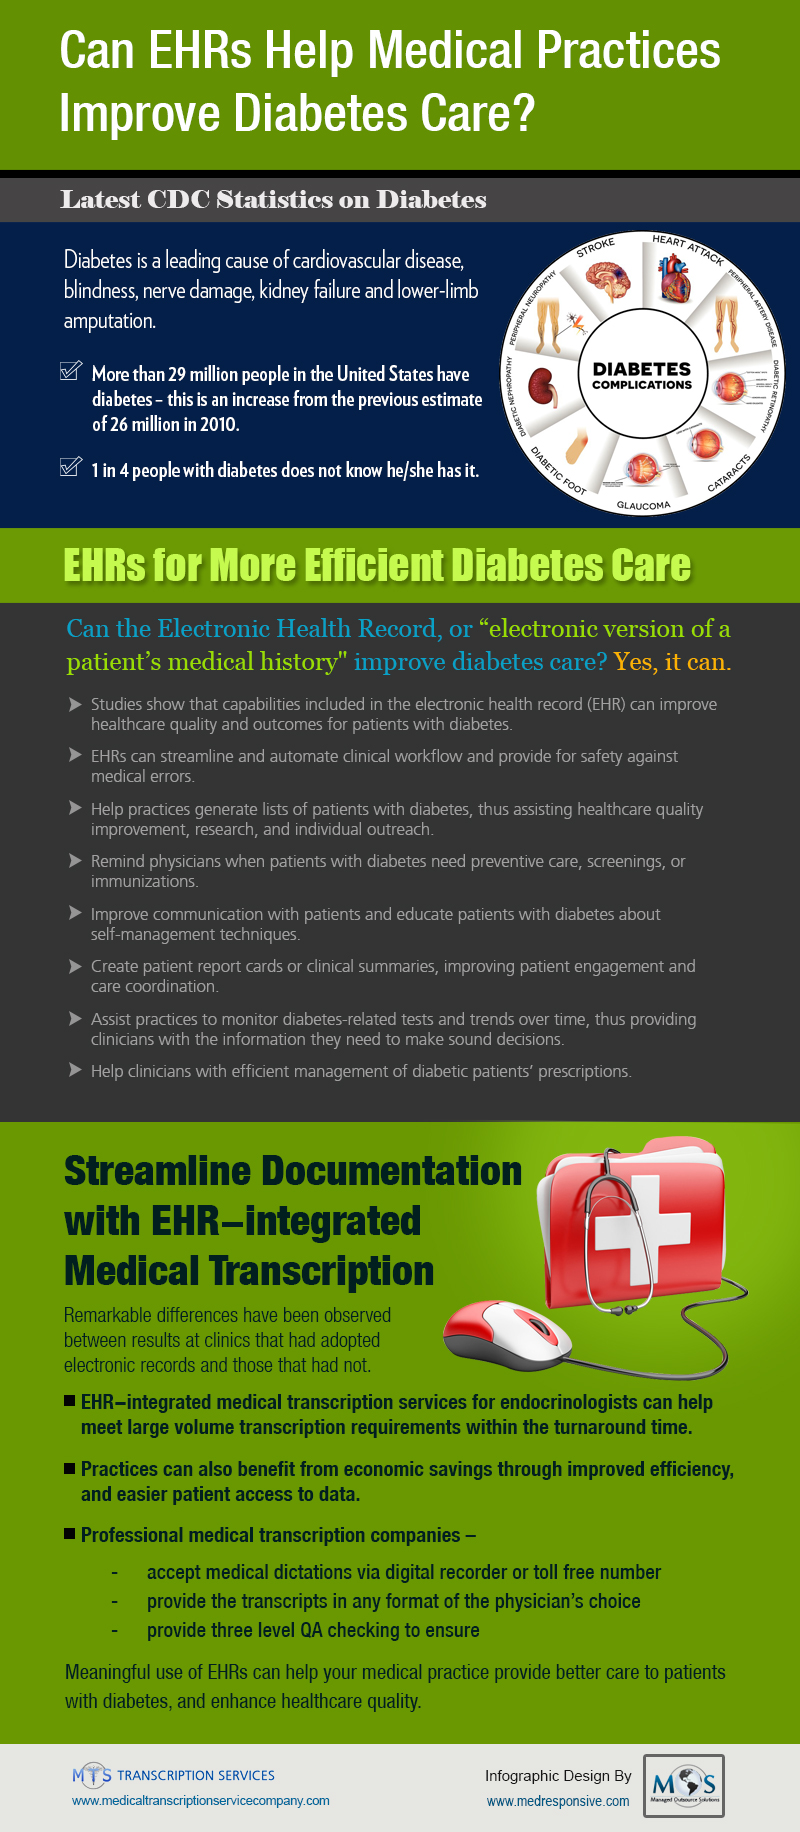 Can EHRs Help Medical Practices Improve Diabetes Care?